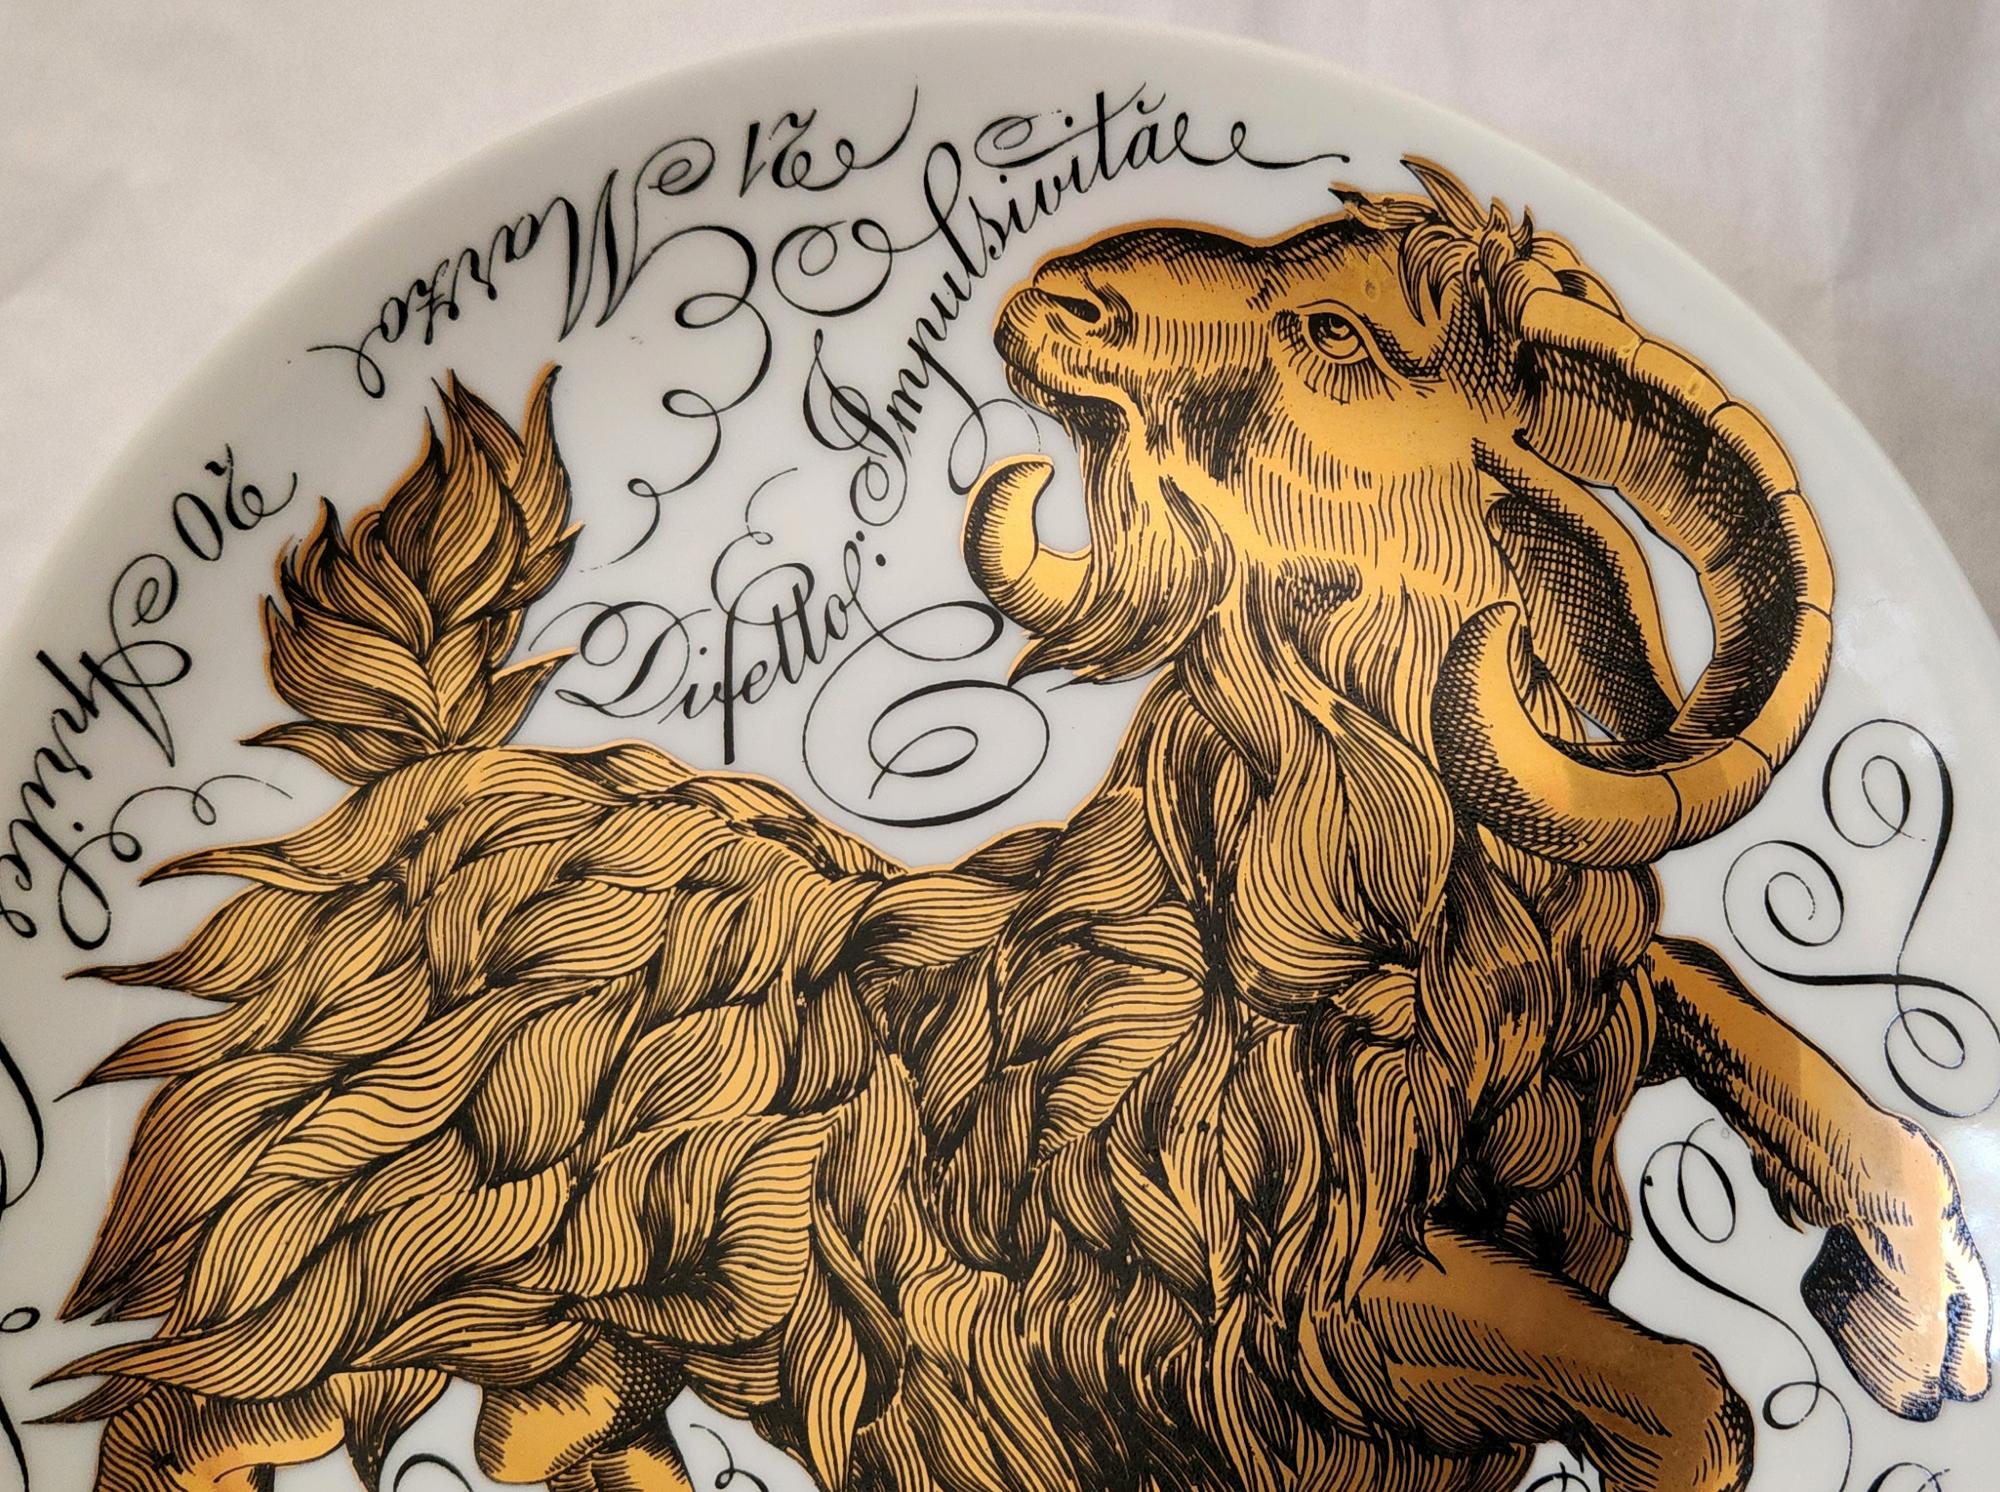 Vintage Piero Fornasetti Porcelain Zodiac Plate, Number 9
Aries,
Astrali Pattern,
Made for Corisia
Dated 1972

The plate for the sign ARIES is dated 1972 and is numbered #9.  The plate depicts the Astrological Zodiac sign Aries which is painted in